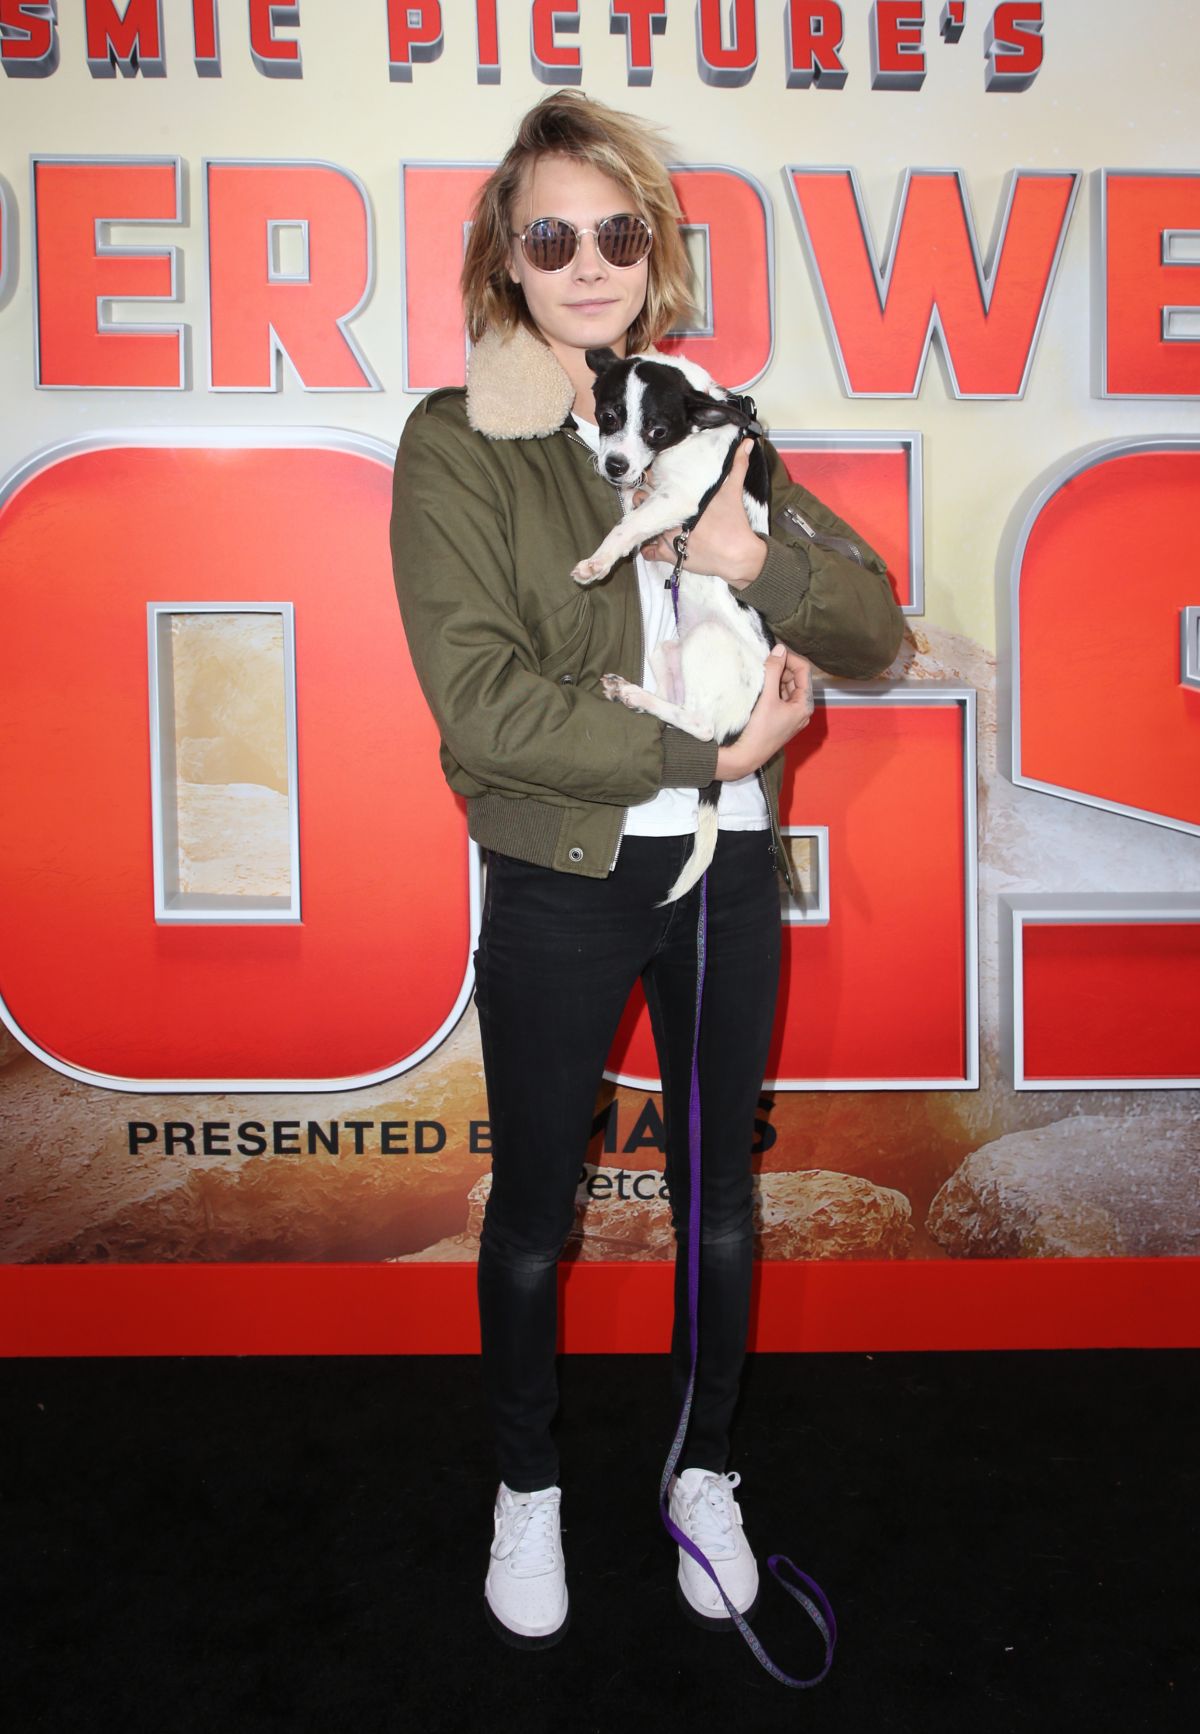 cara-delevingne-at-superpower-dogs-premiere-in-los-angeles-03-09-2019-2.jpg